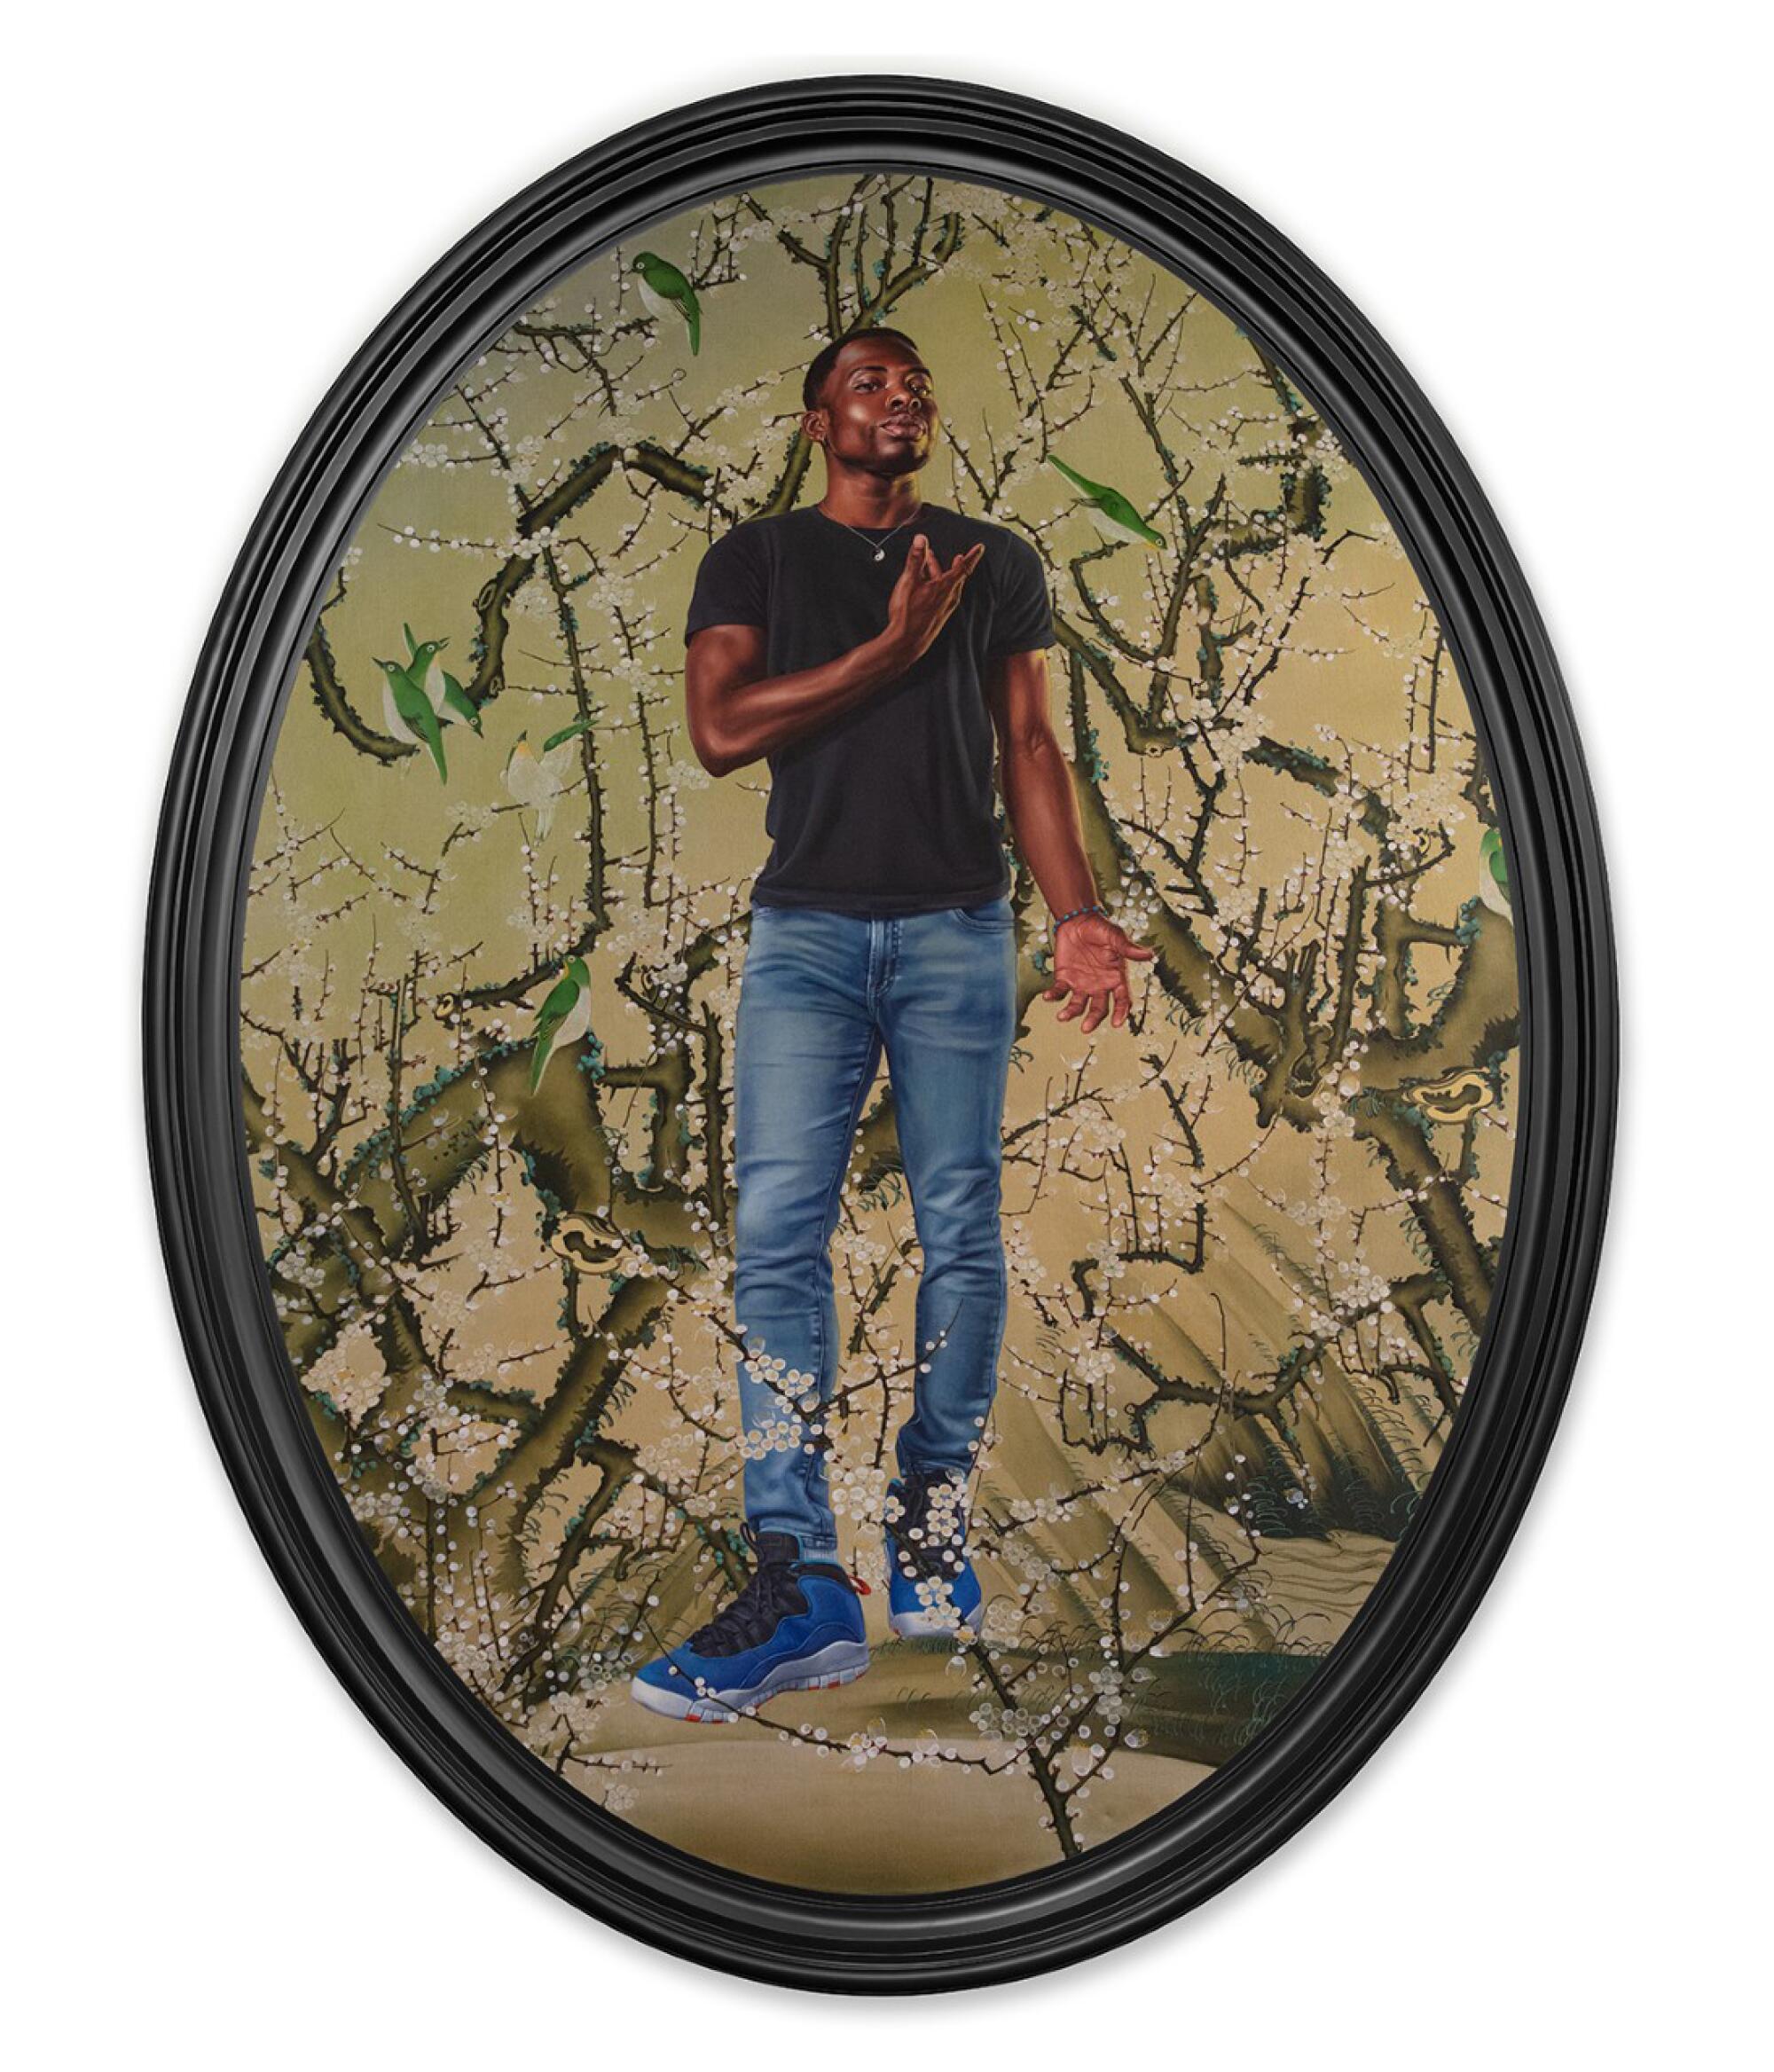 Painting of a young man in an oval frame